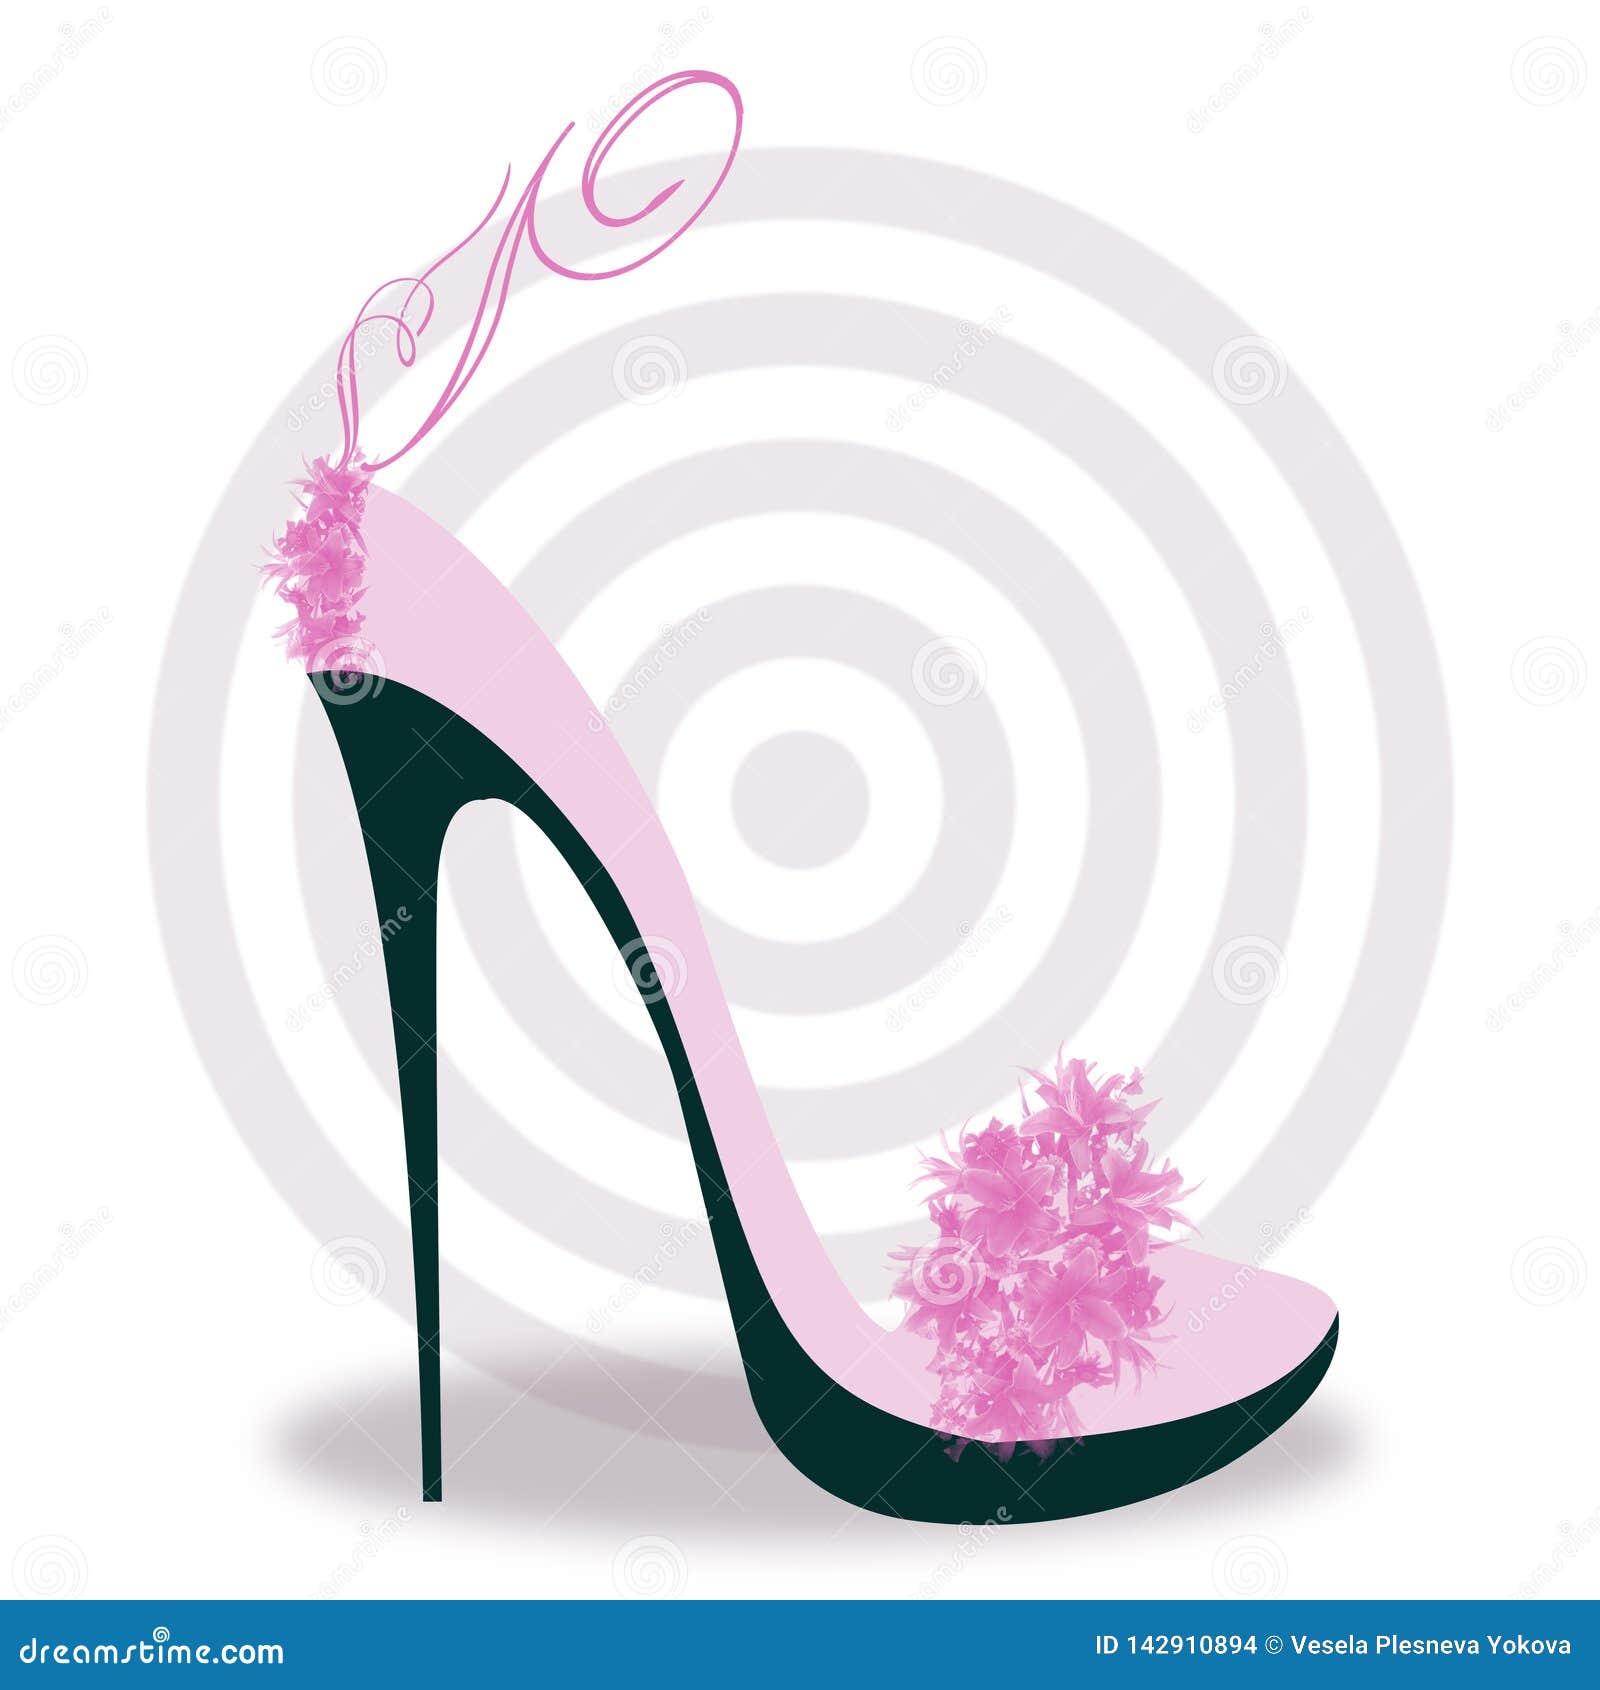 Luxury Stylish High Heel Boot Stock Vector - Illustration of concentric ...